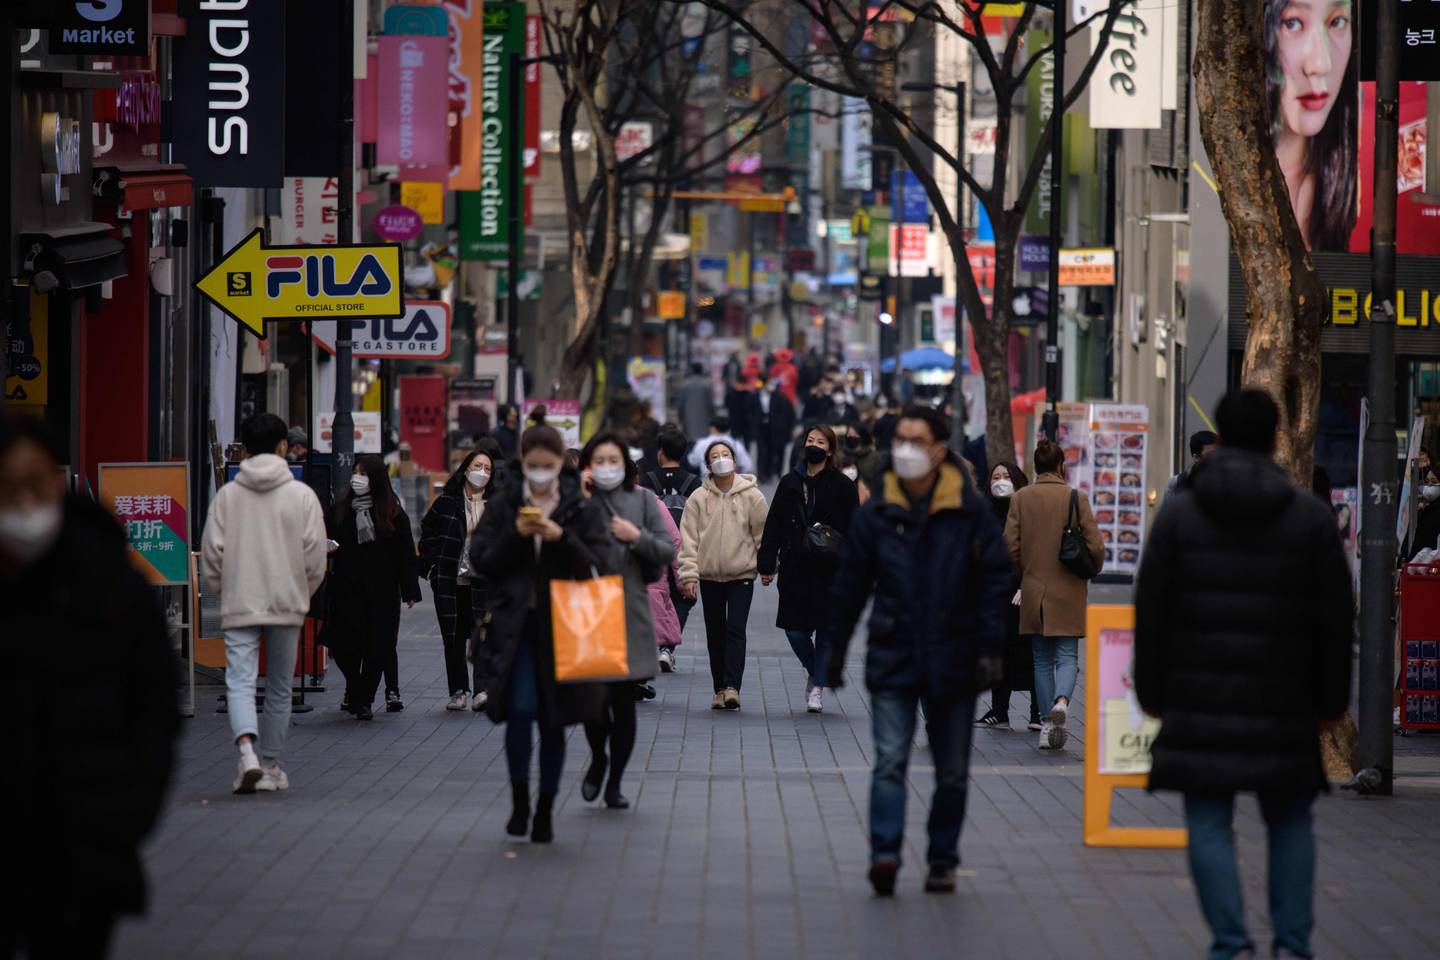 Pedestrians wearing face masks walk through Seoul's Myeongdong shopping district. Getty Images.